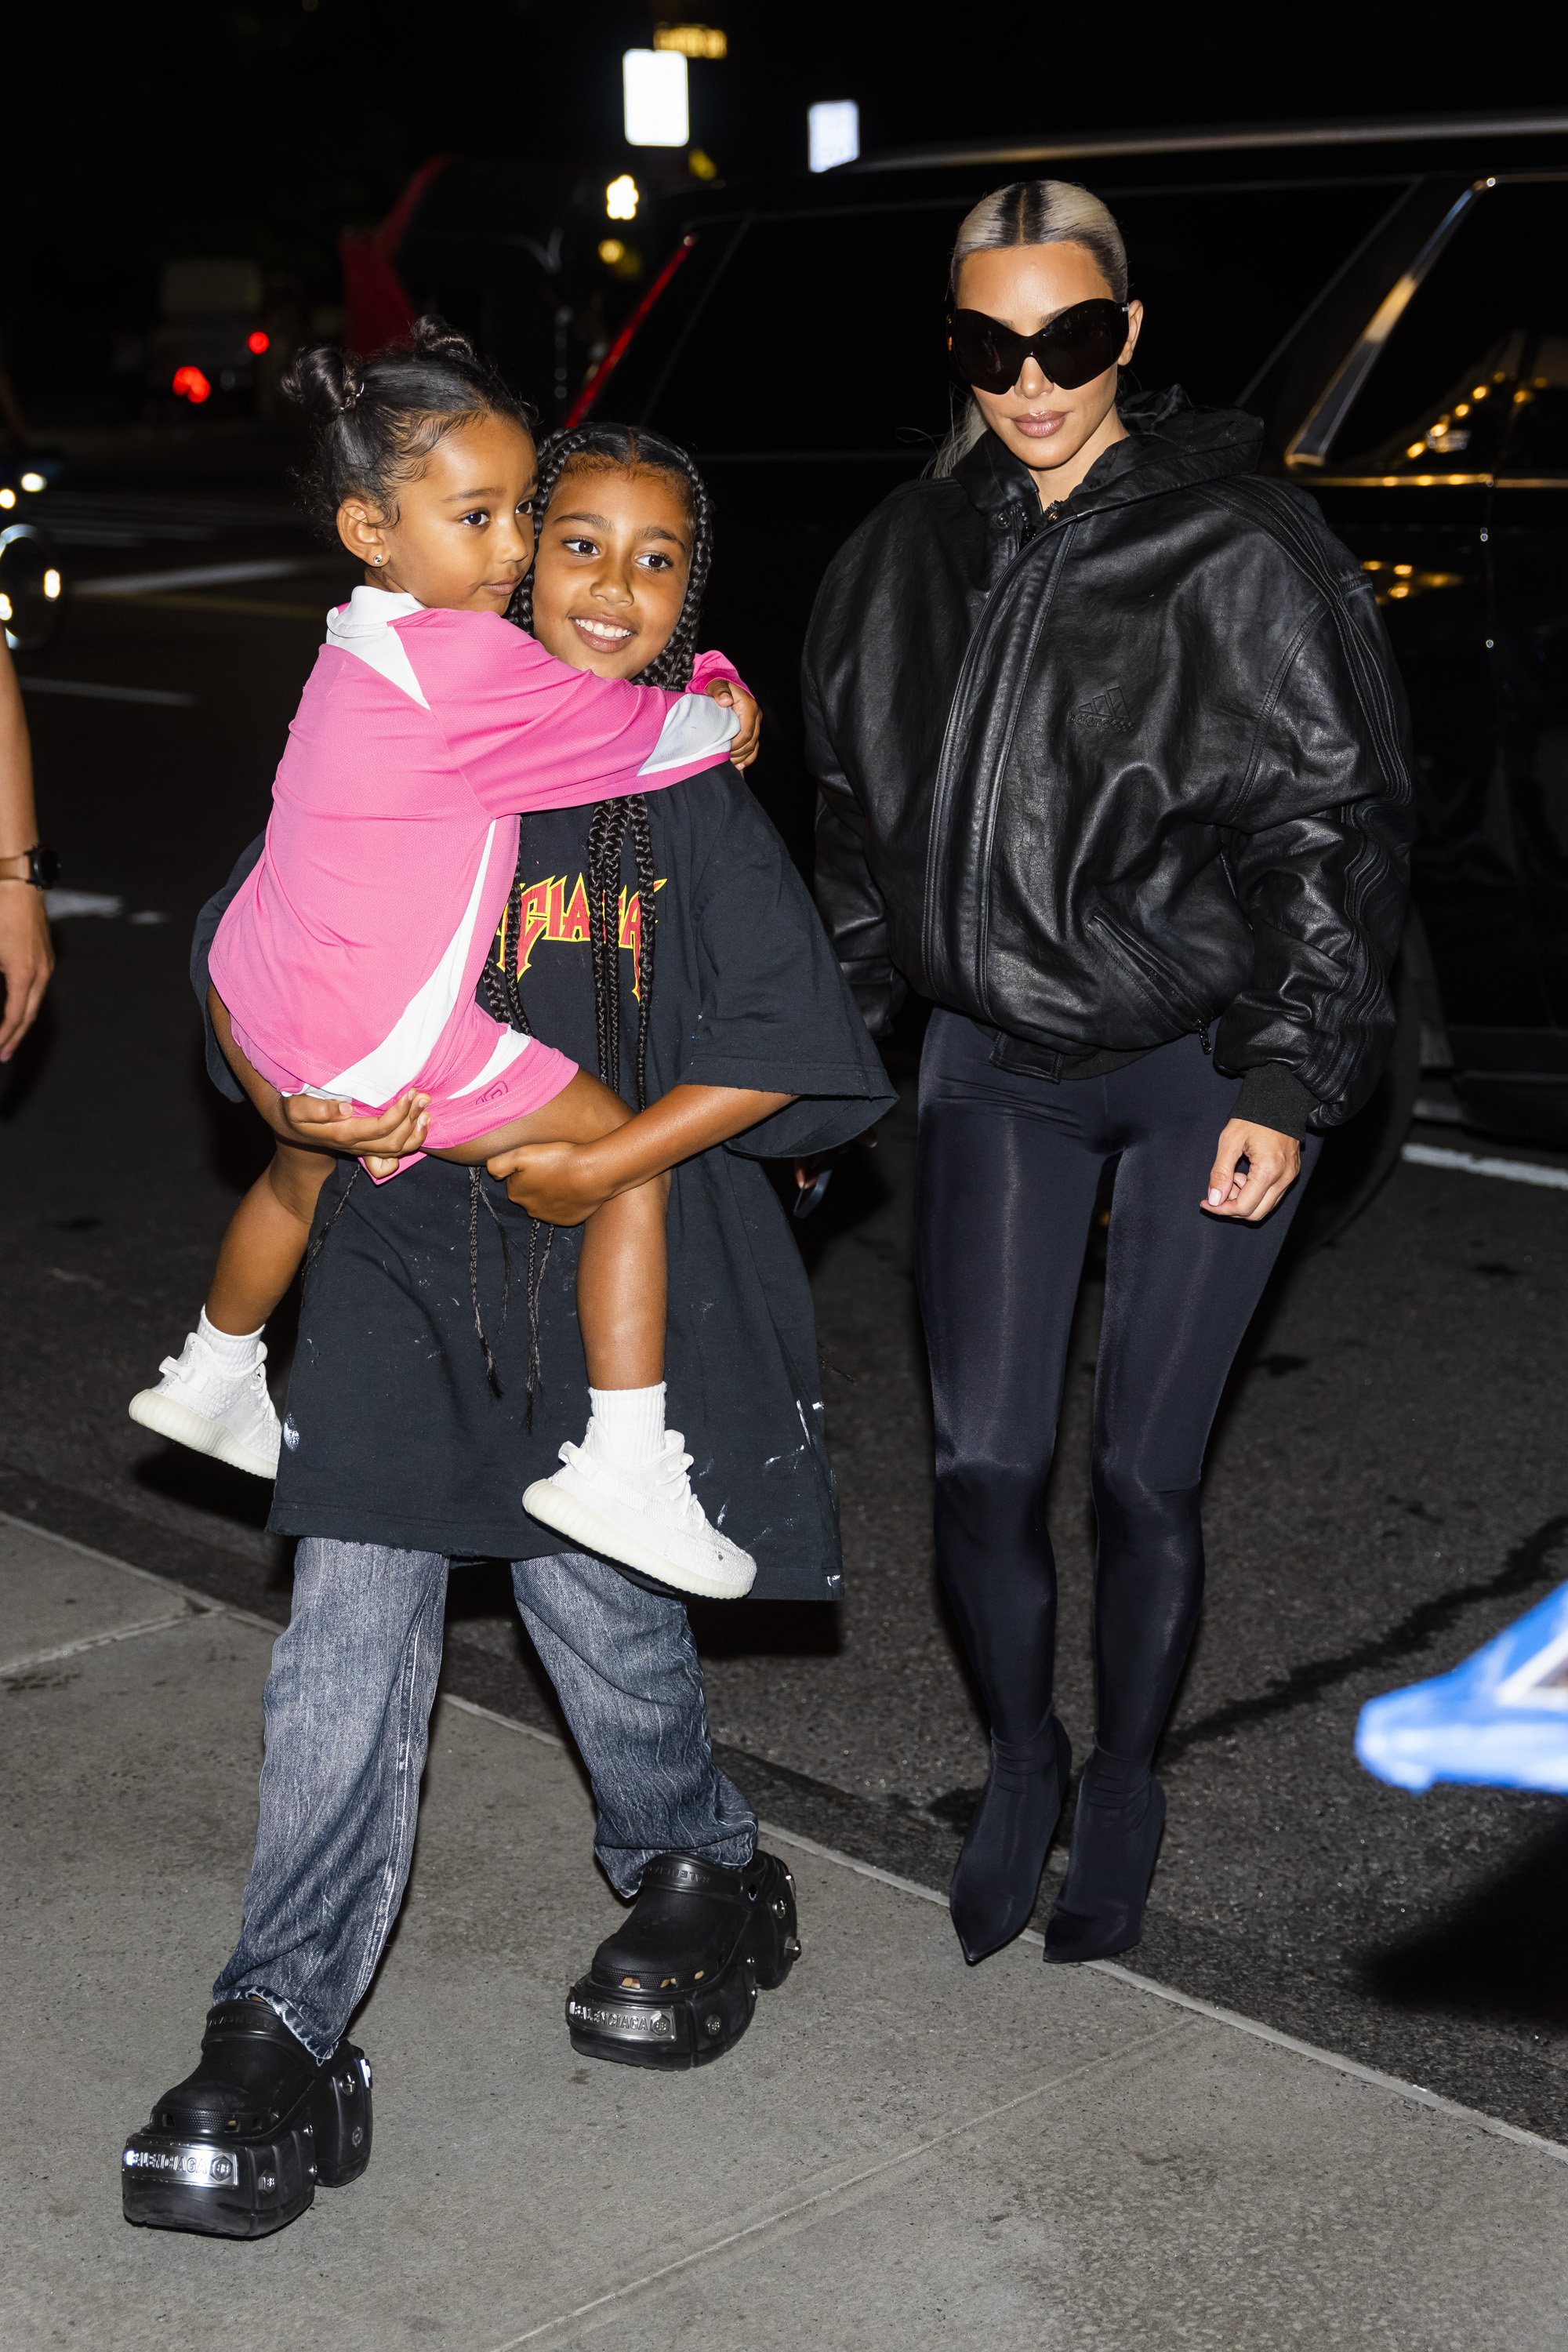 North recently shared another video of her zipping her younger sister Chicago up in a box